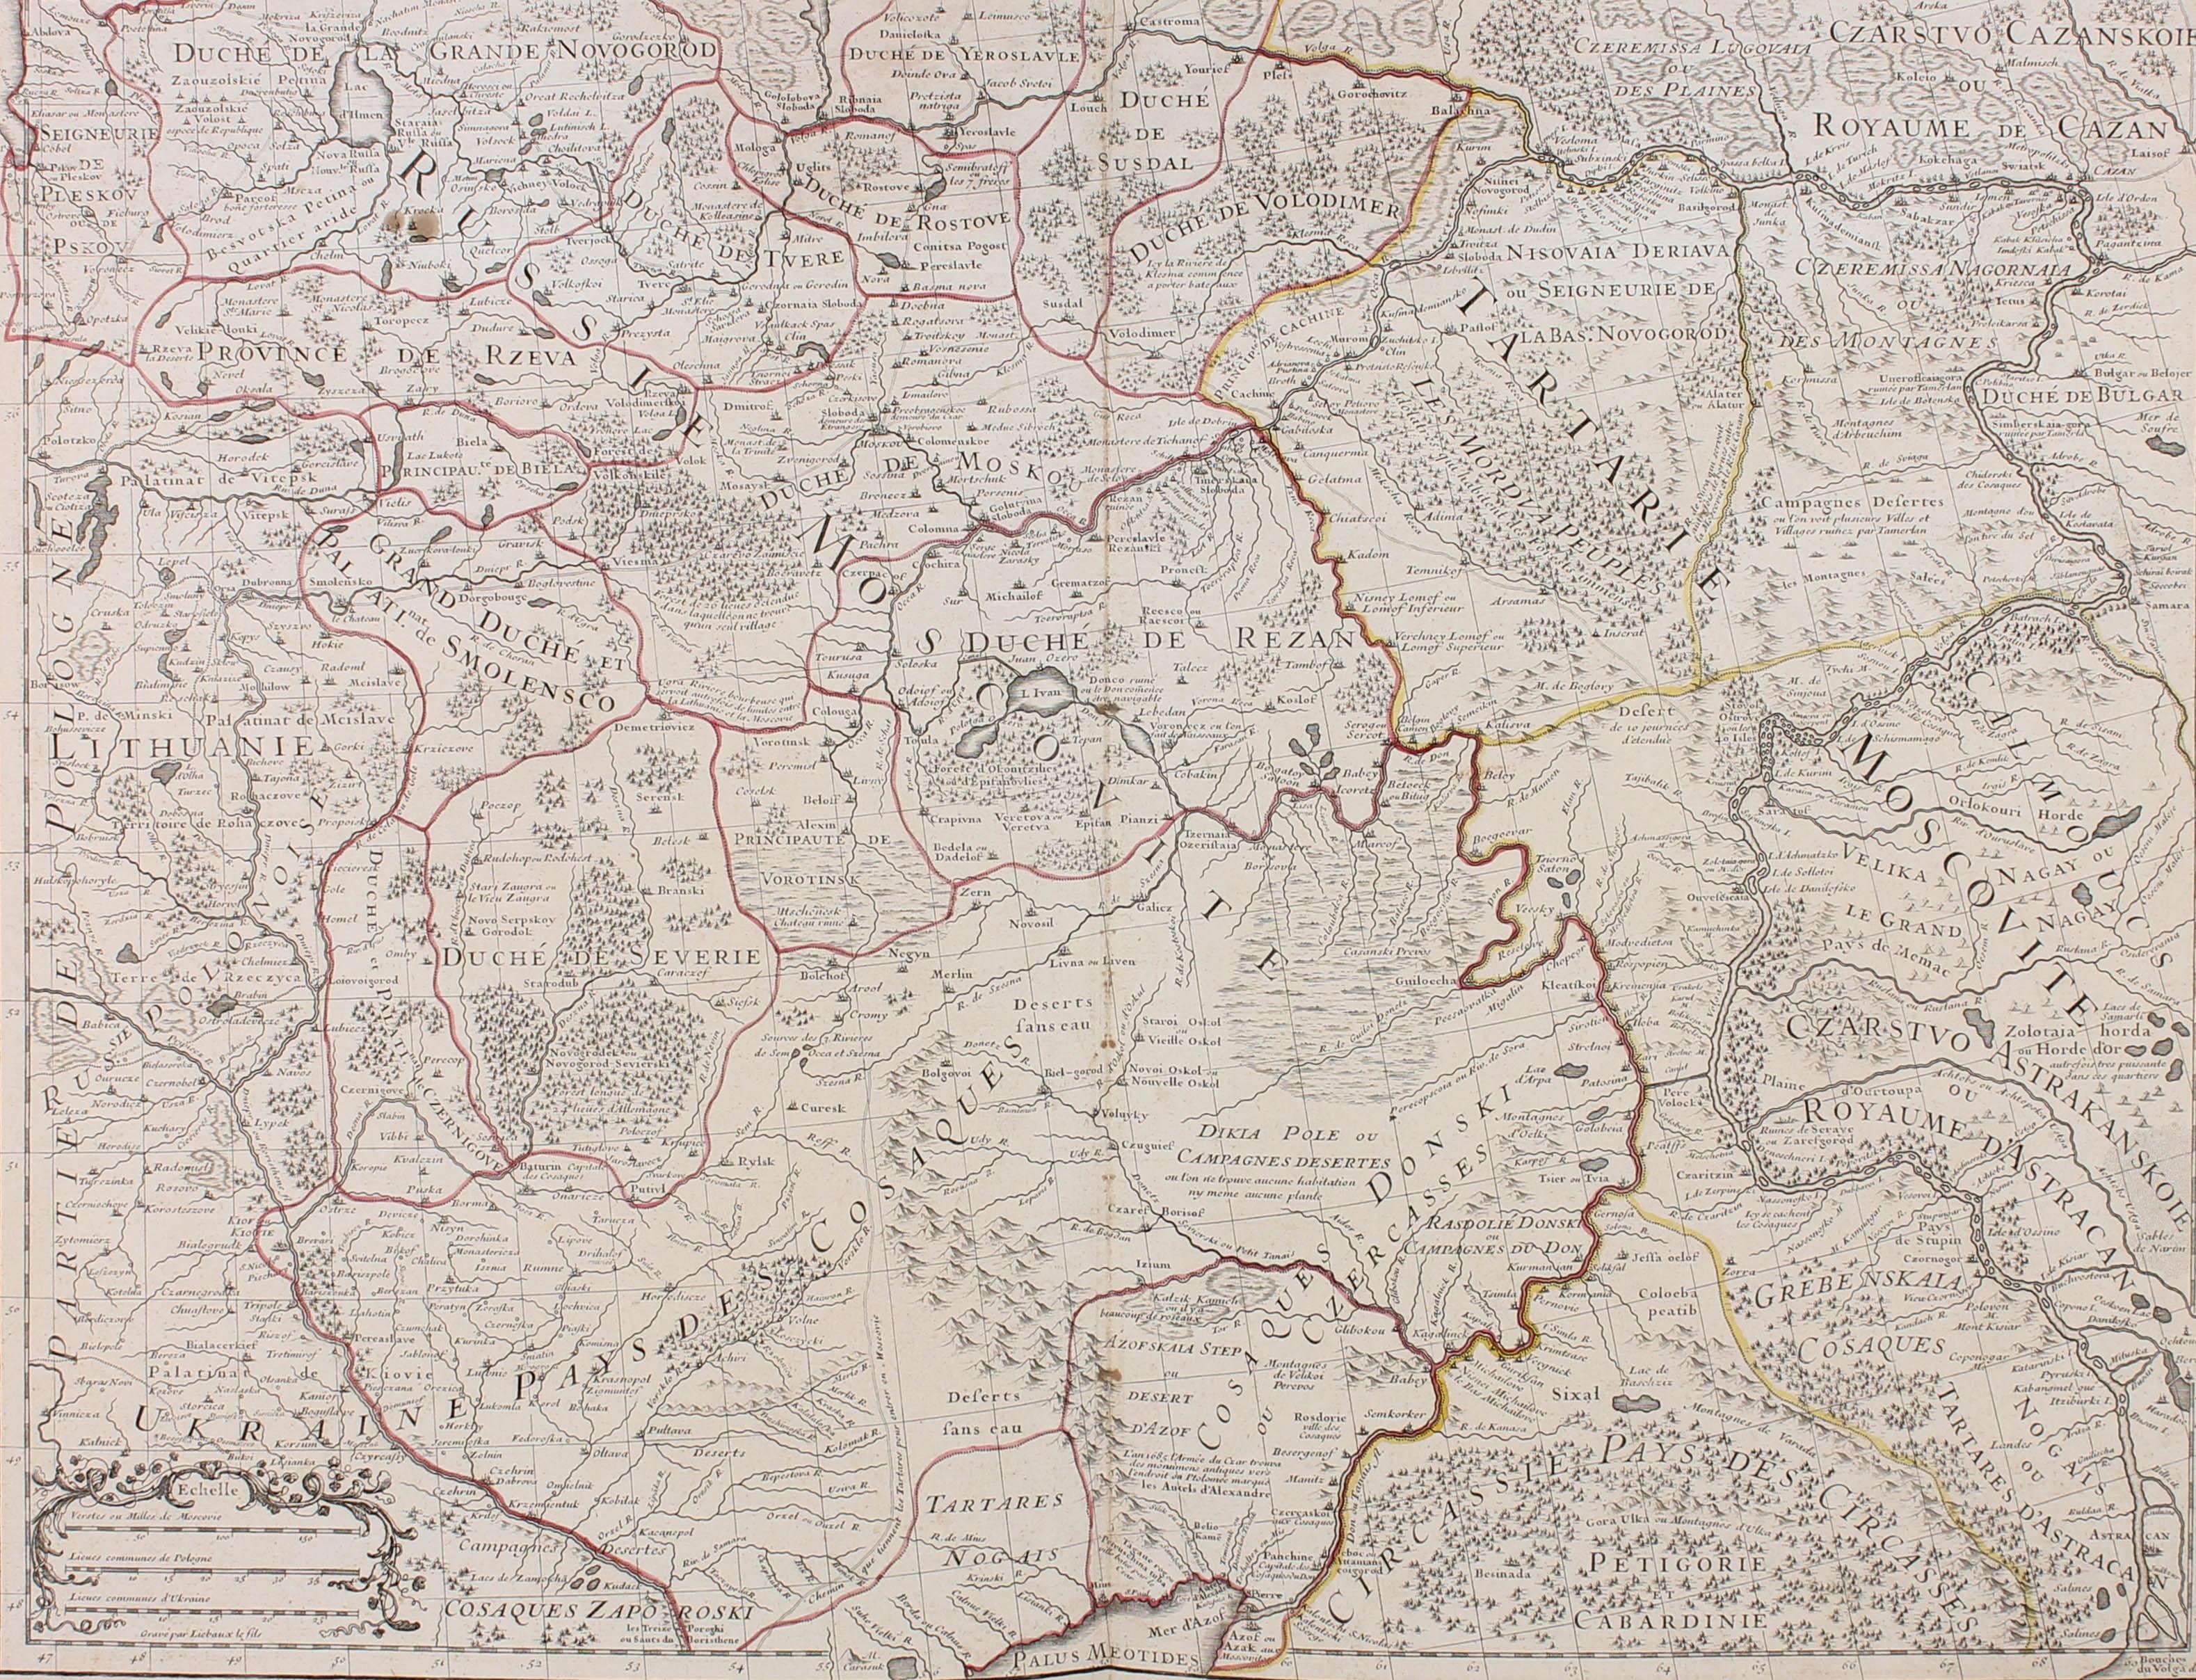 A early 18th Century map showing a section of Muscovite Russia. This is the lower half of the complete original map, finished with hand colouring. The artist's names are engraved in plate at the lower left underneath the scale bar. On laid.